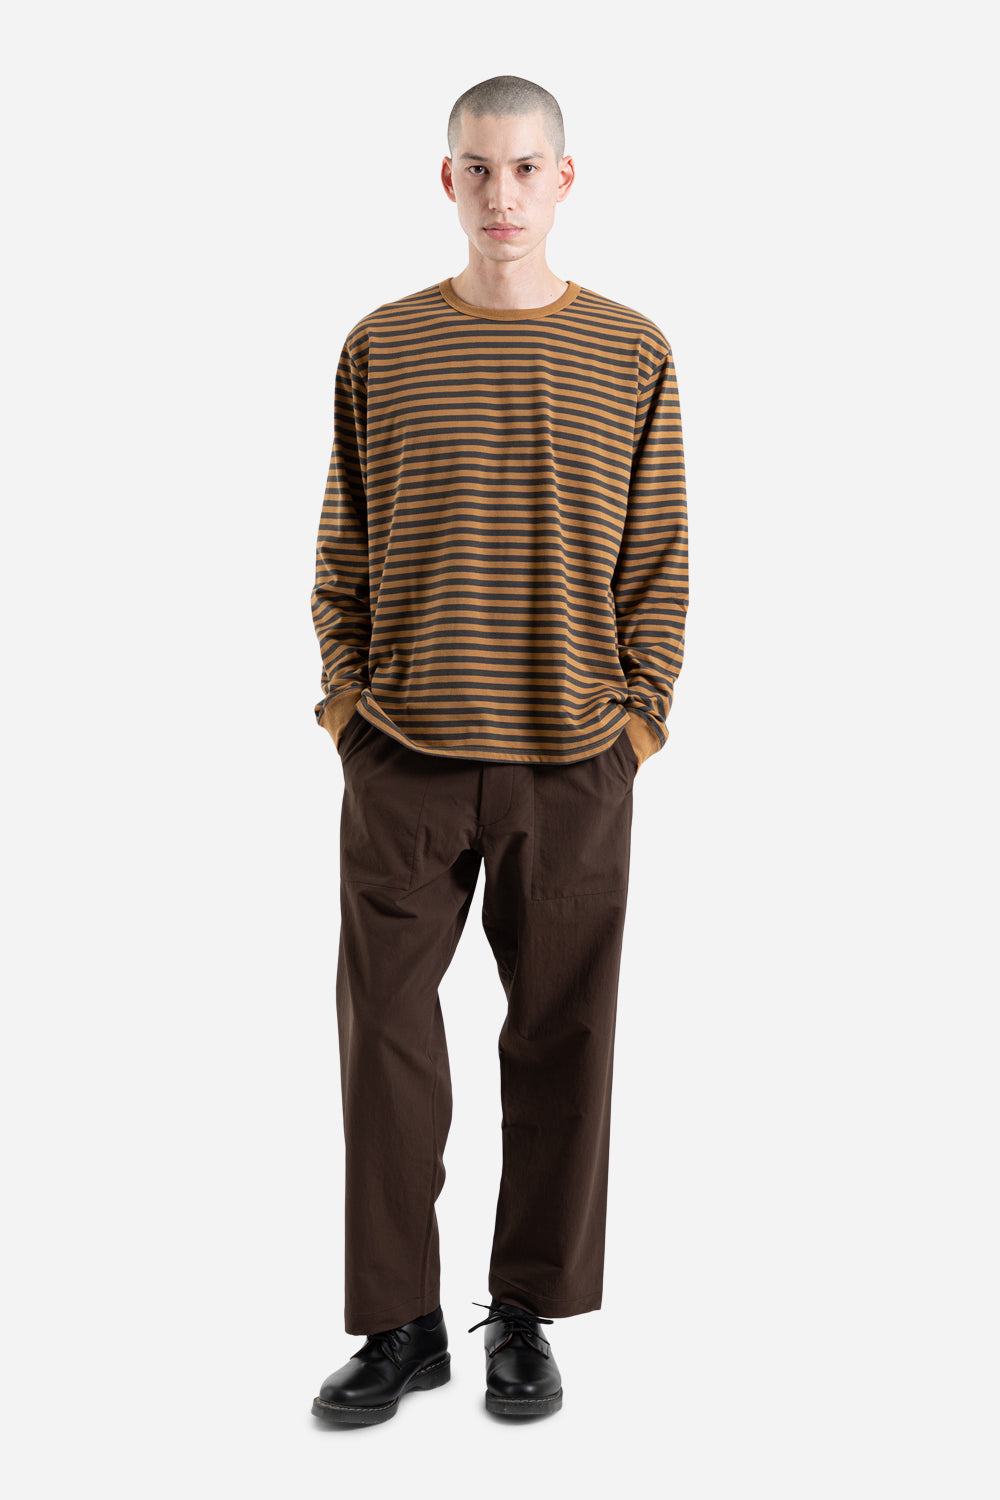 Nanamica Coolmax Striped Jersey LS in Brown and Charcoal